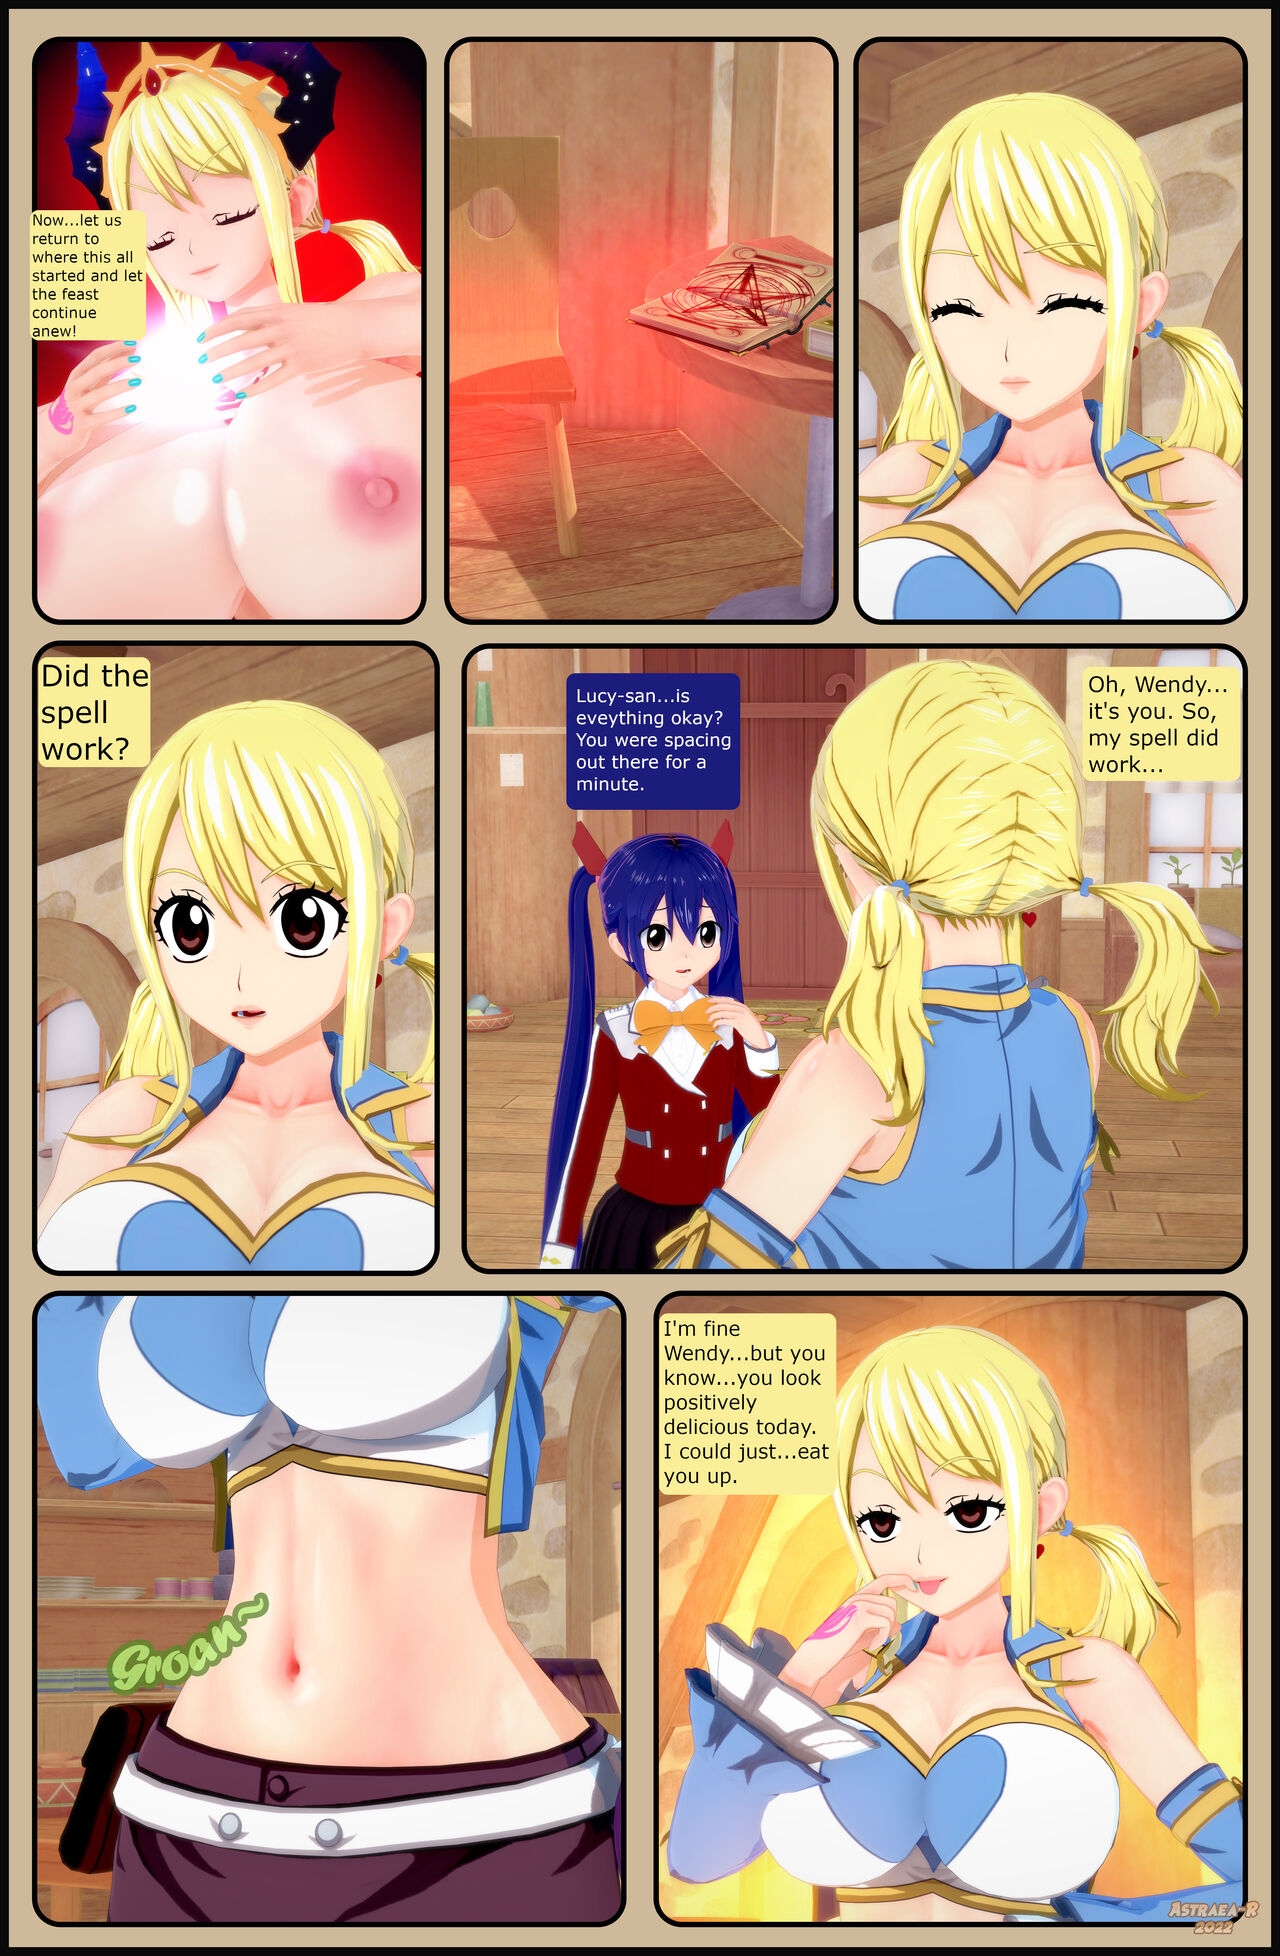 [Astraea-R] Lucy's Vore n' Growth Spell 53